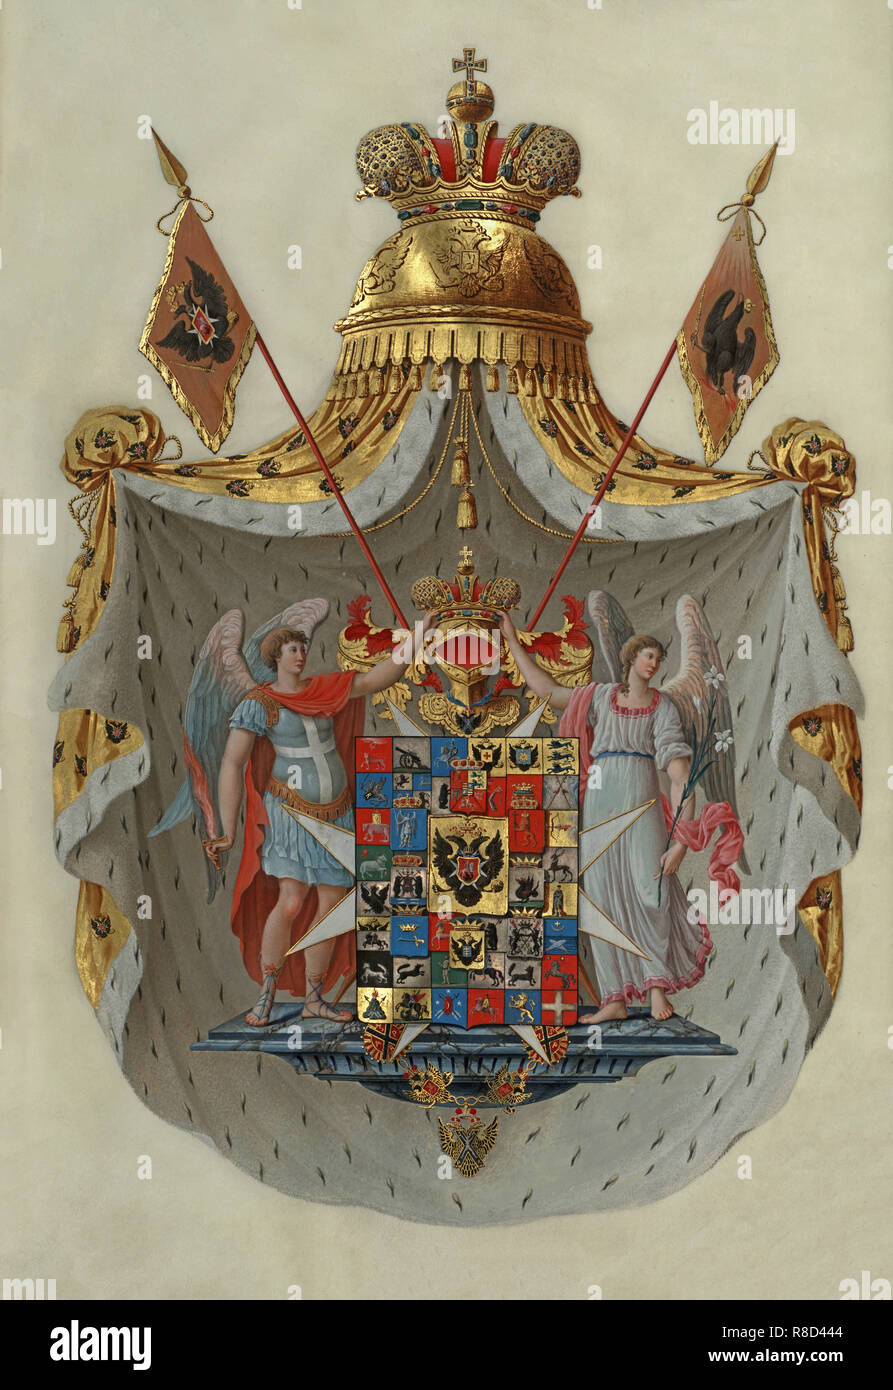 What is the meaning of the Russian Empire's coat of arms? - Quora